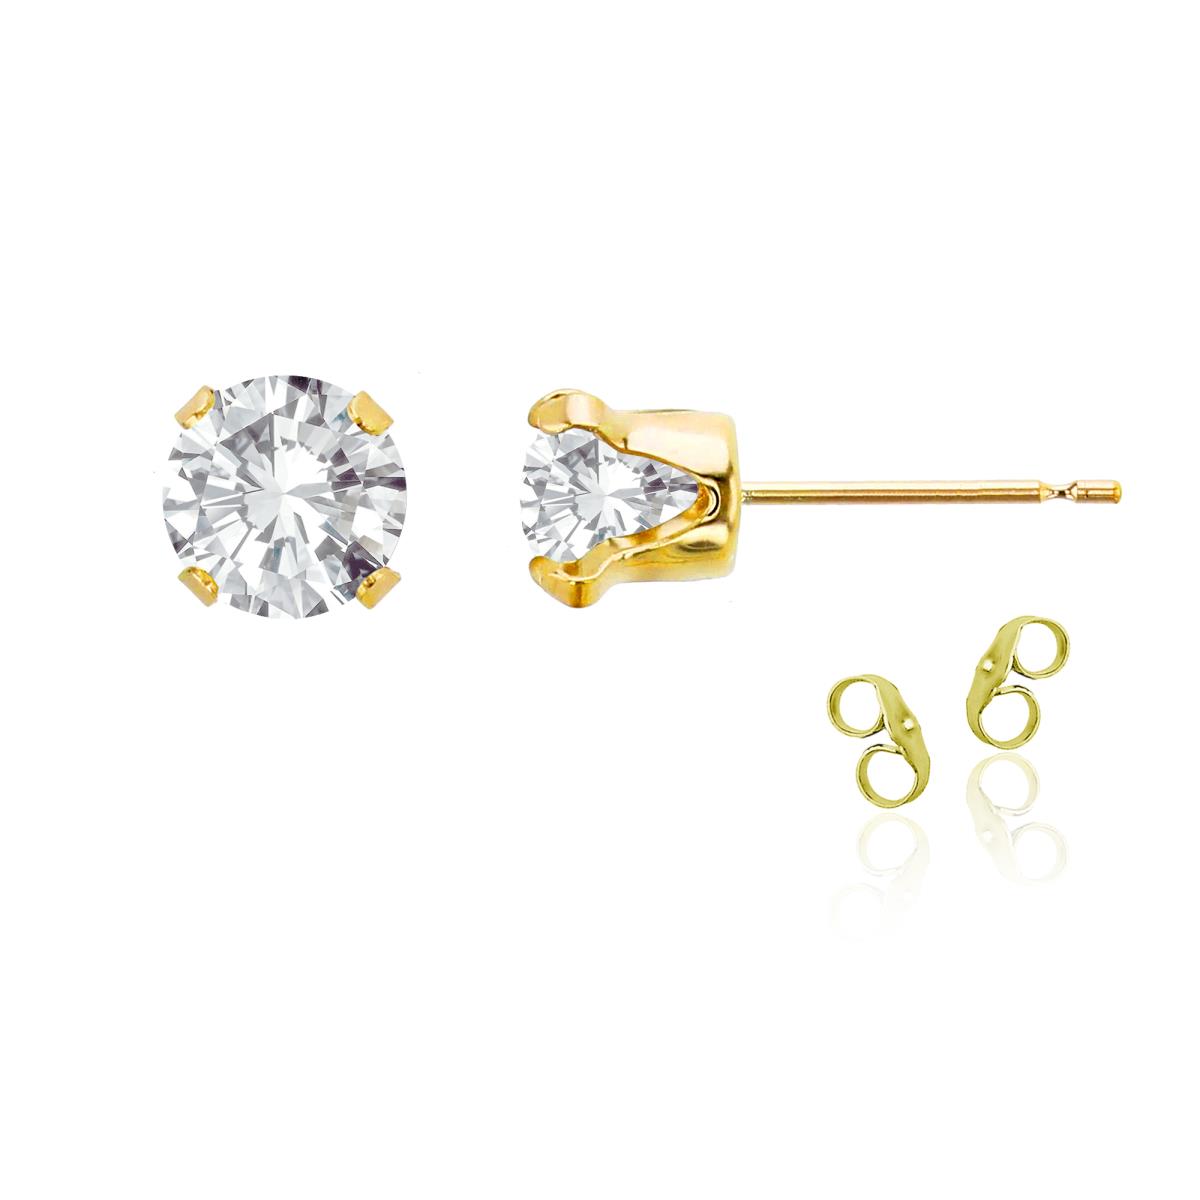 Sterling Silver Yellow 6mm Round White Topaz Stud Earring with Clutch